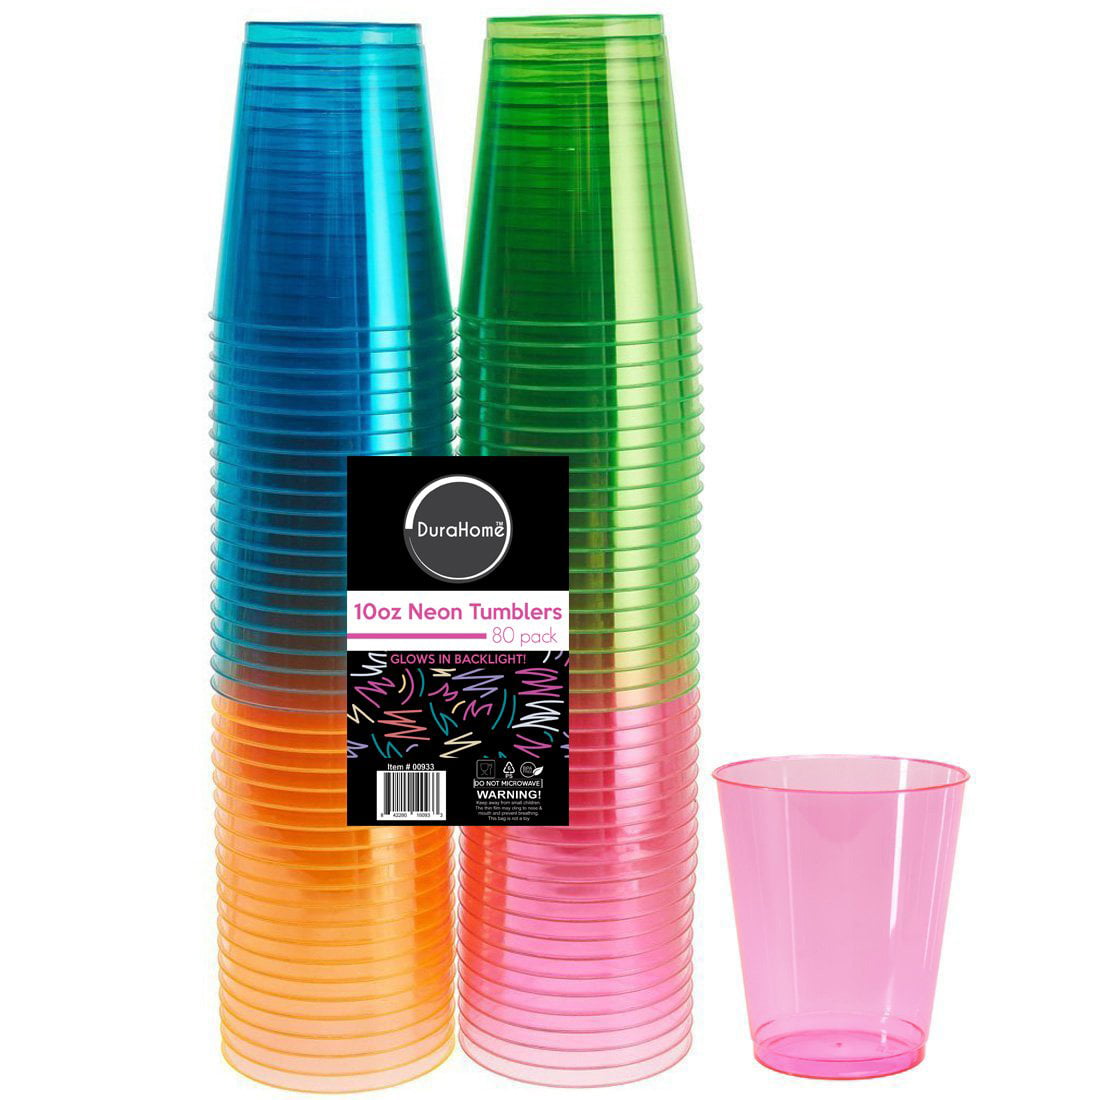 DuraHome - Hard Plastic Cups - 10 Oz. Party Cups Beverage Tumblers in